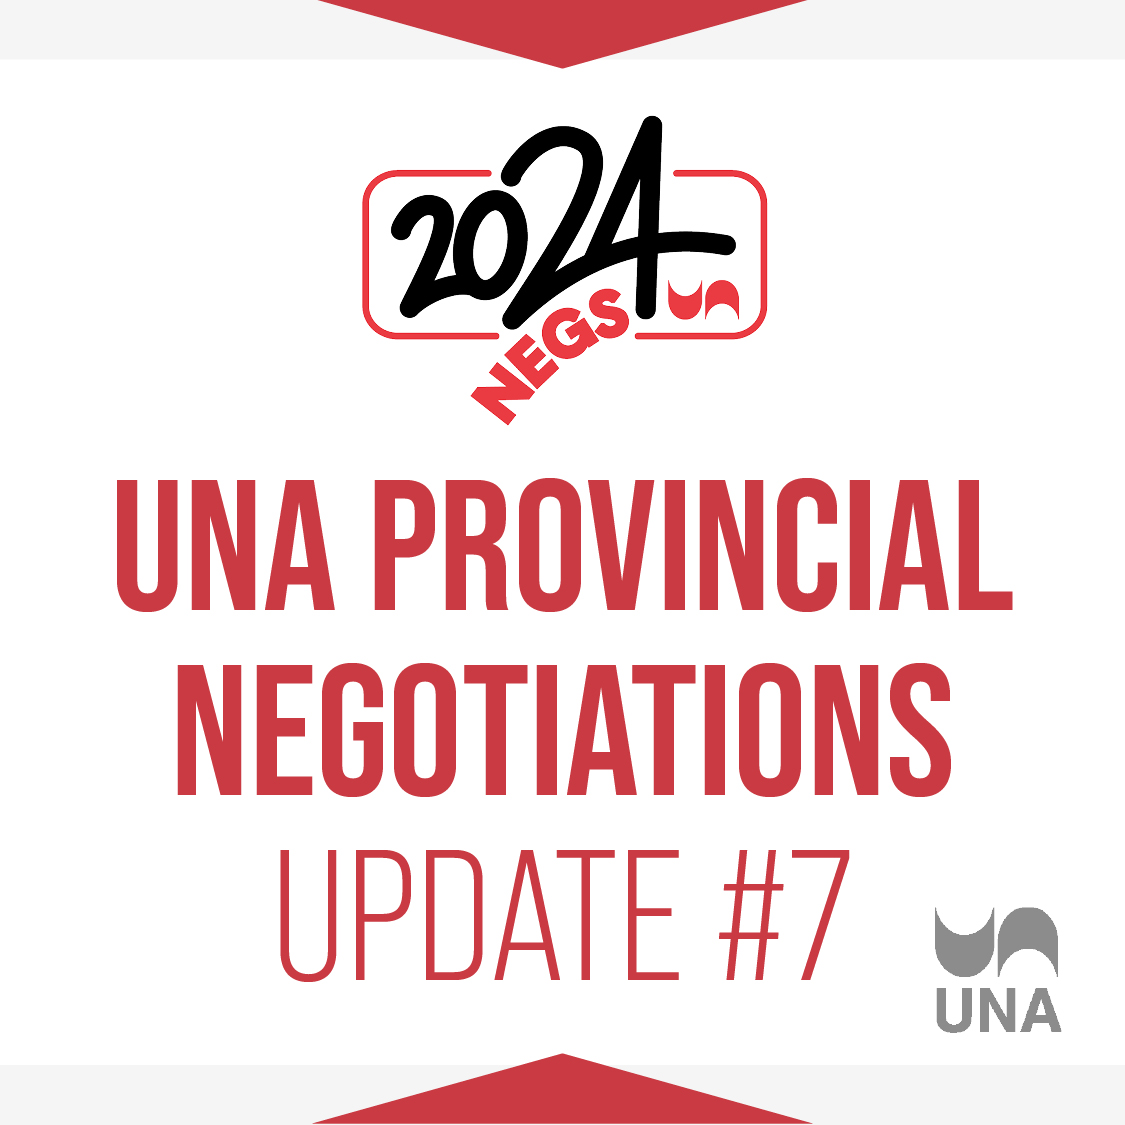 ➡️ AHS agrees to five bargaining days in May to negotiate Employee transfers to Recovery Alberta. 

Read the latest update from UNA's Negotiations Committee: una.ca/1531/ahs-barga… #AlbertaNurses #ABNurses #AHS #RecoveryAlberta